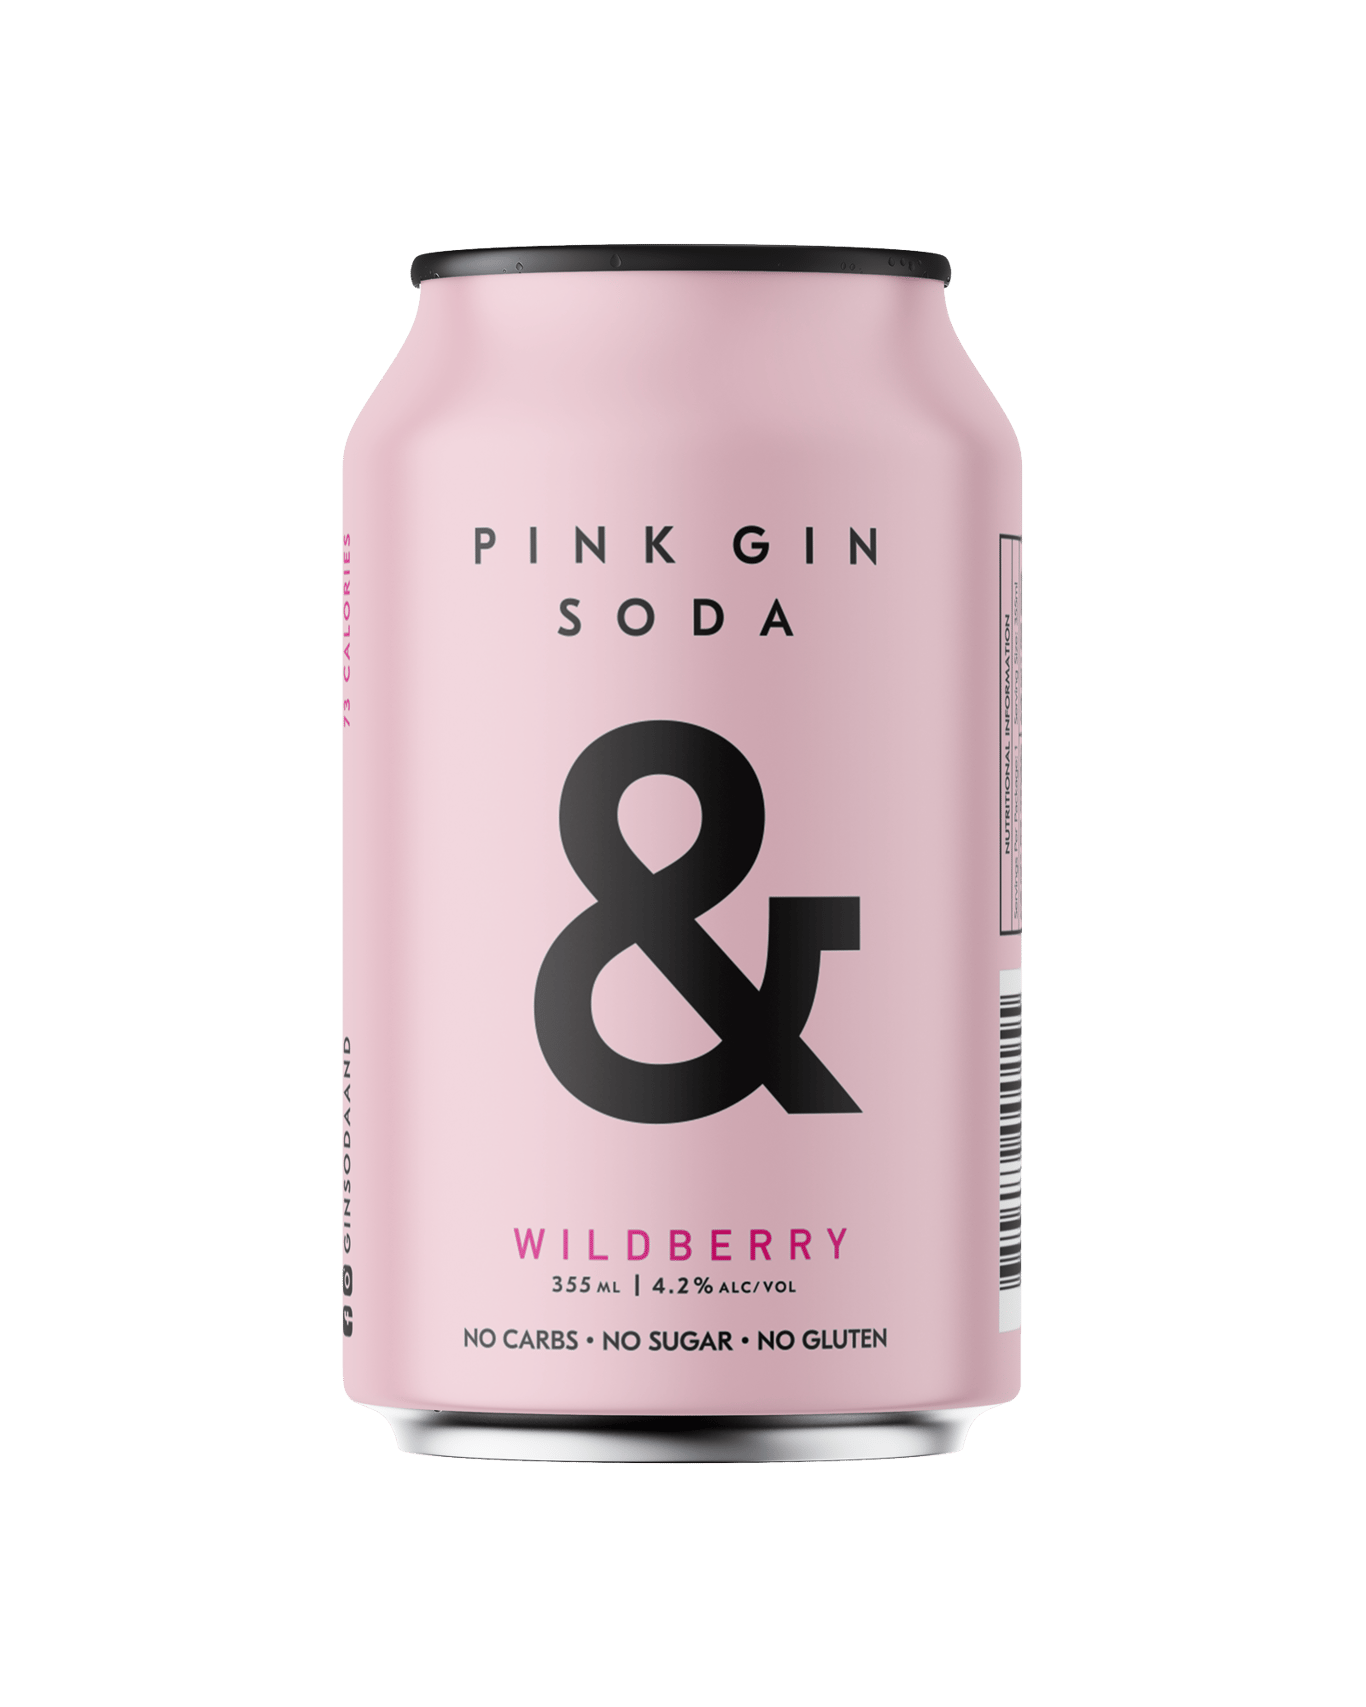 Buy Pink Gin And Soda Cans 355ml Online Lowest Price Guarantee Best Deals Same Day Delivery